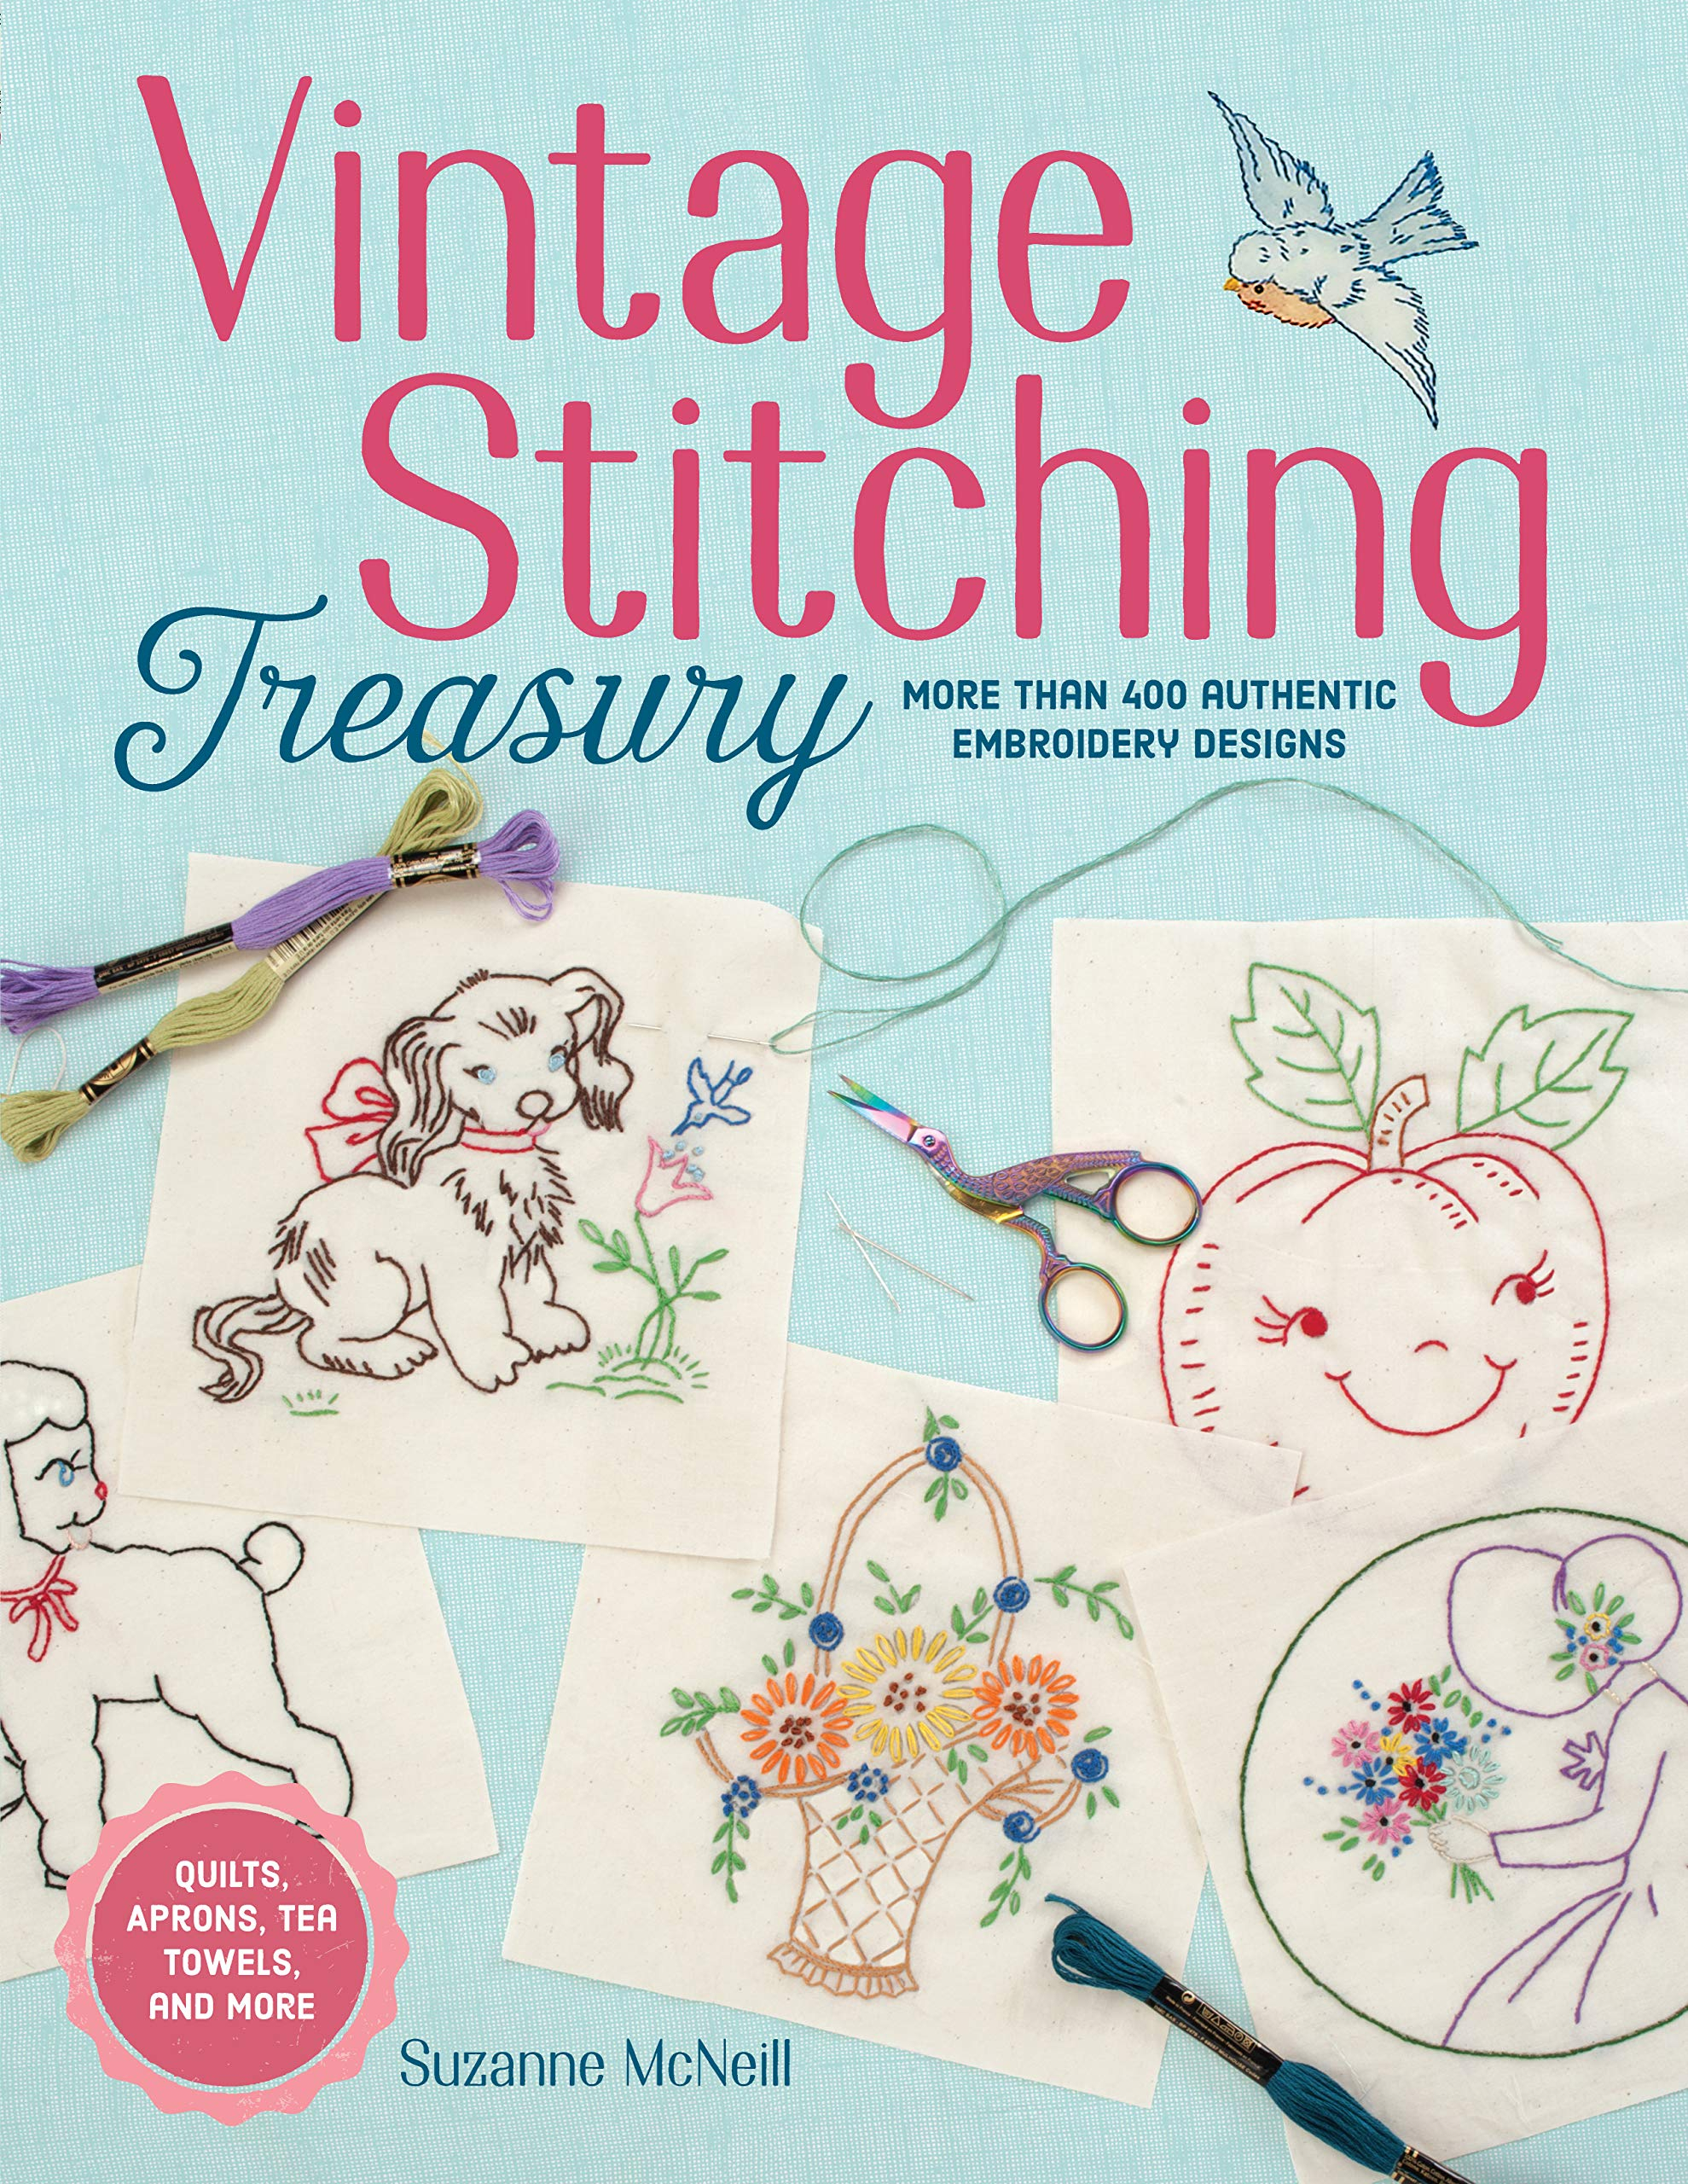 Vintage Embroidery Patterns Free Embroidery Pattern Vintage Free Embroidery Patterns